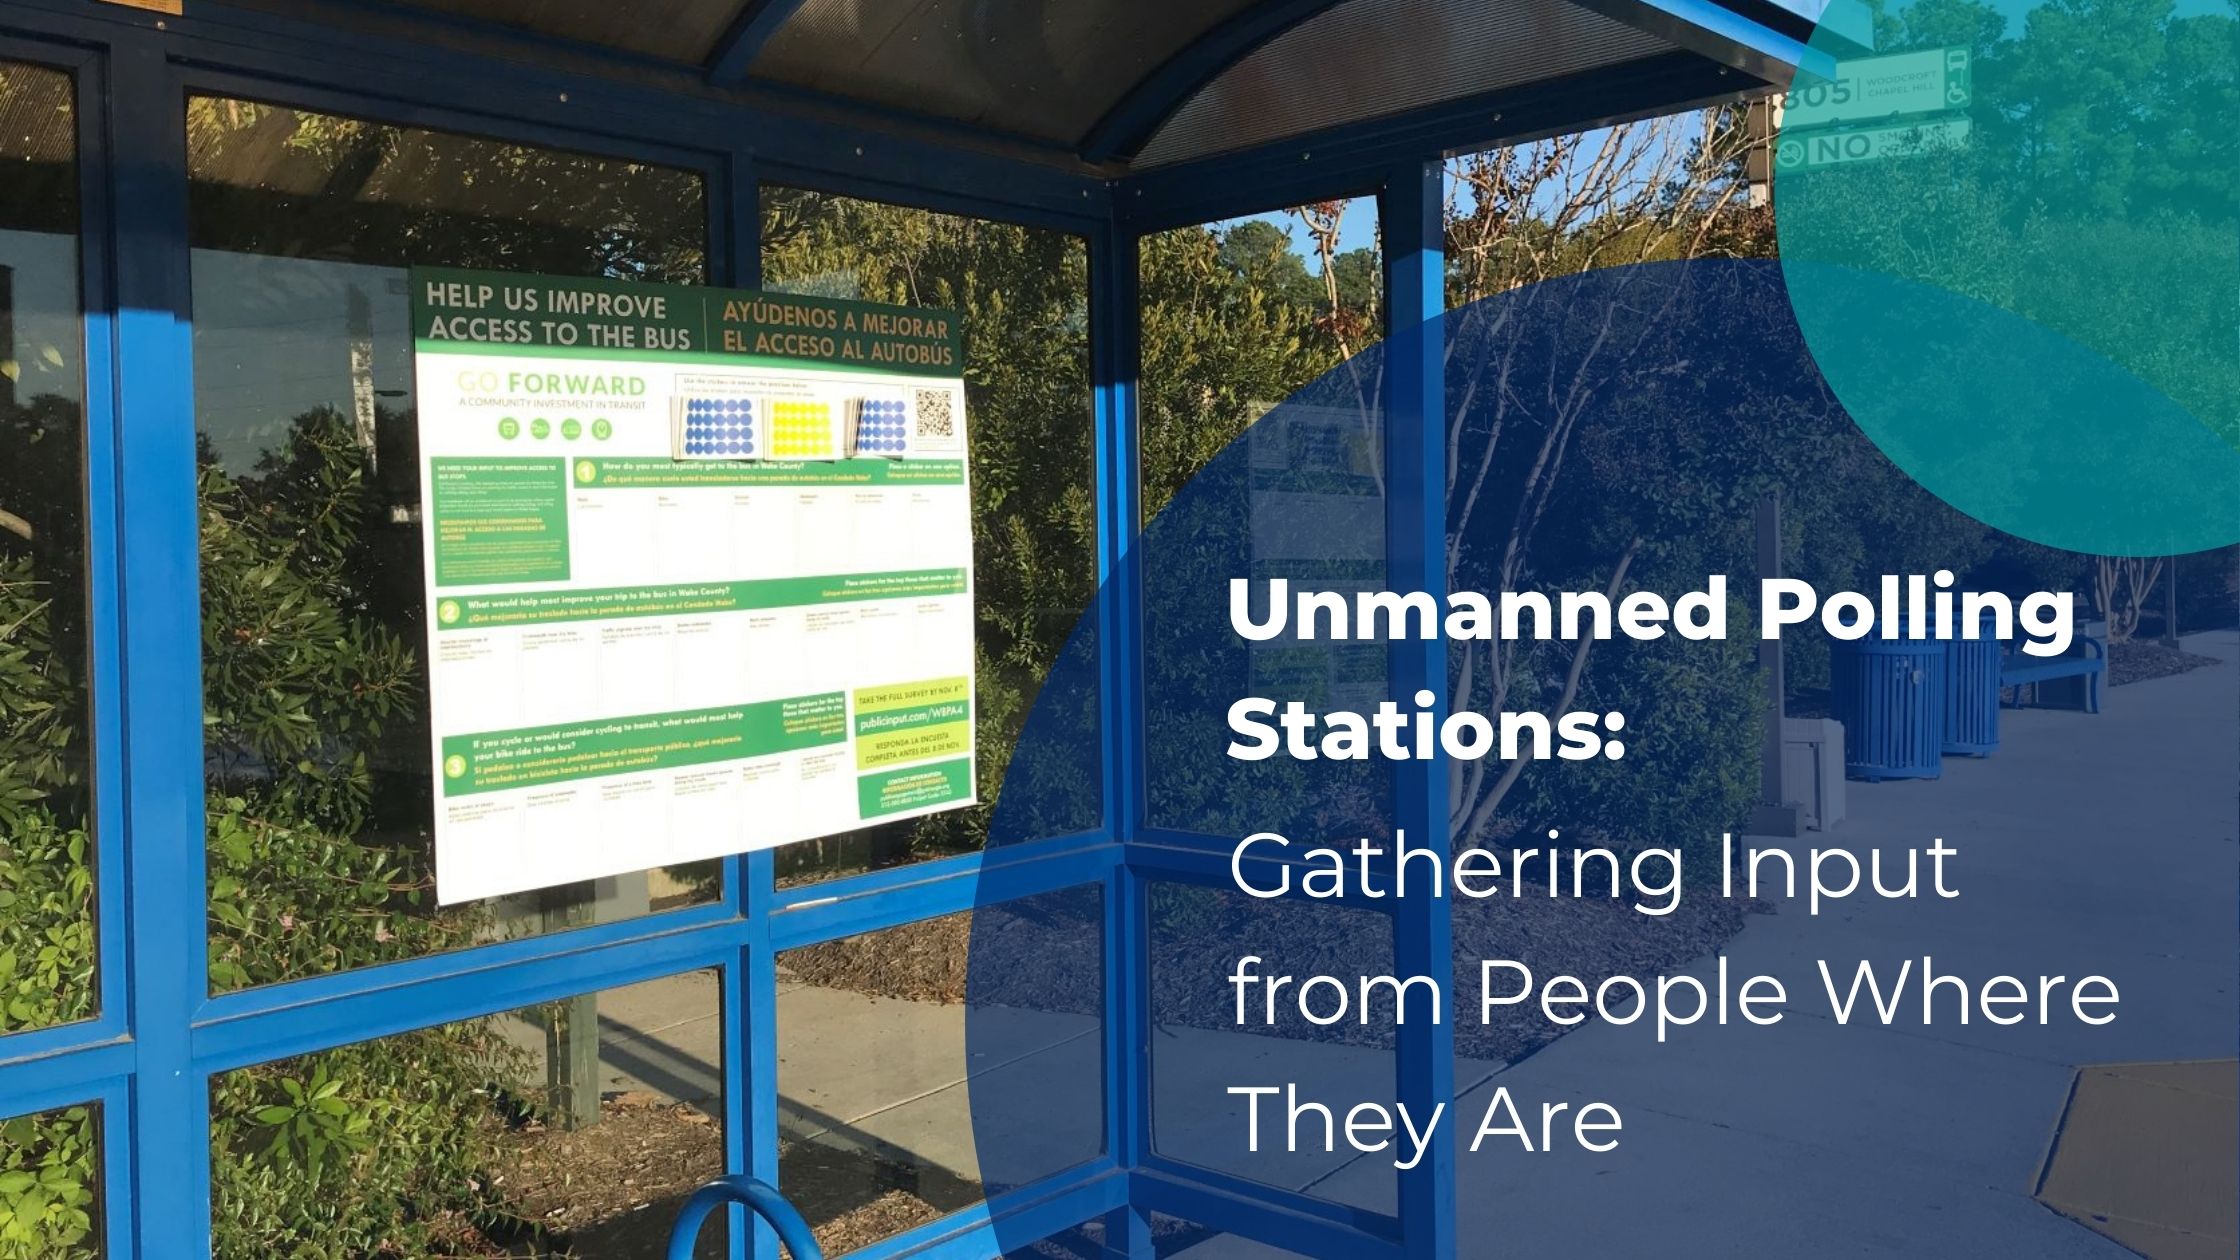 Unmanned Polling Stations: Gathering Input from People Where They Are